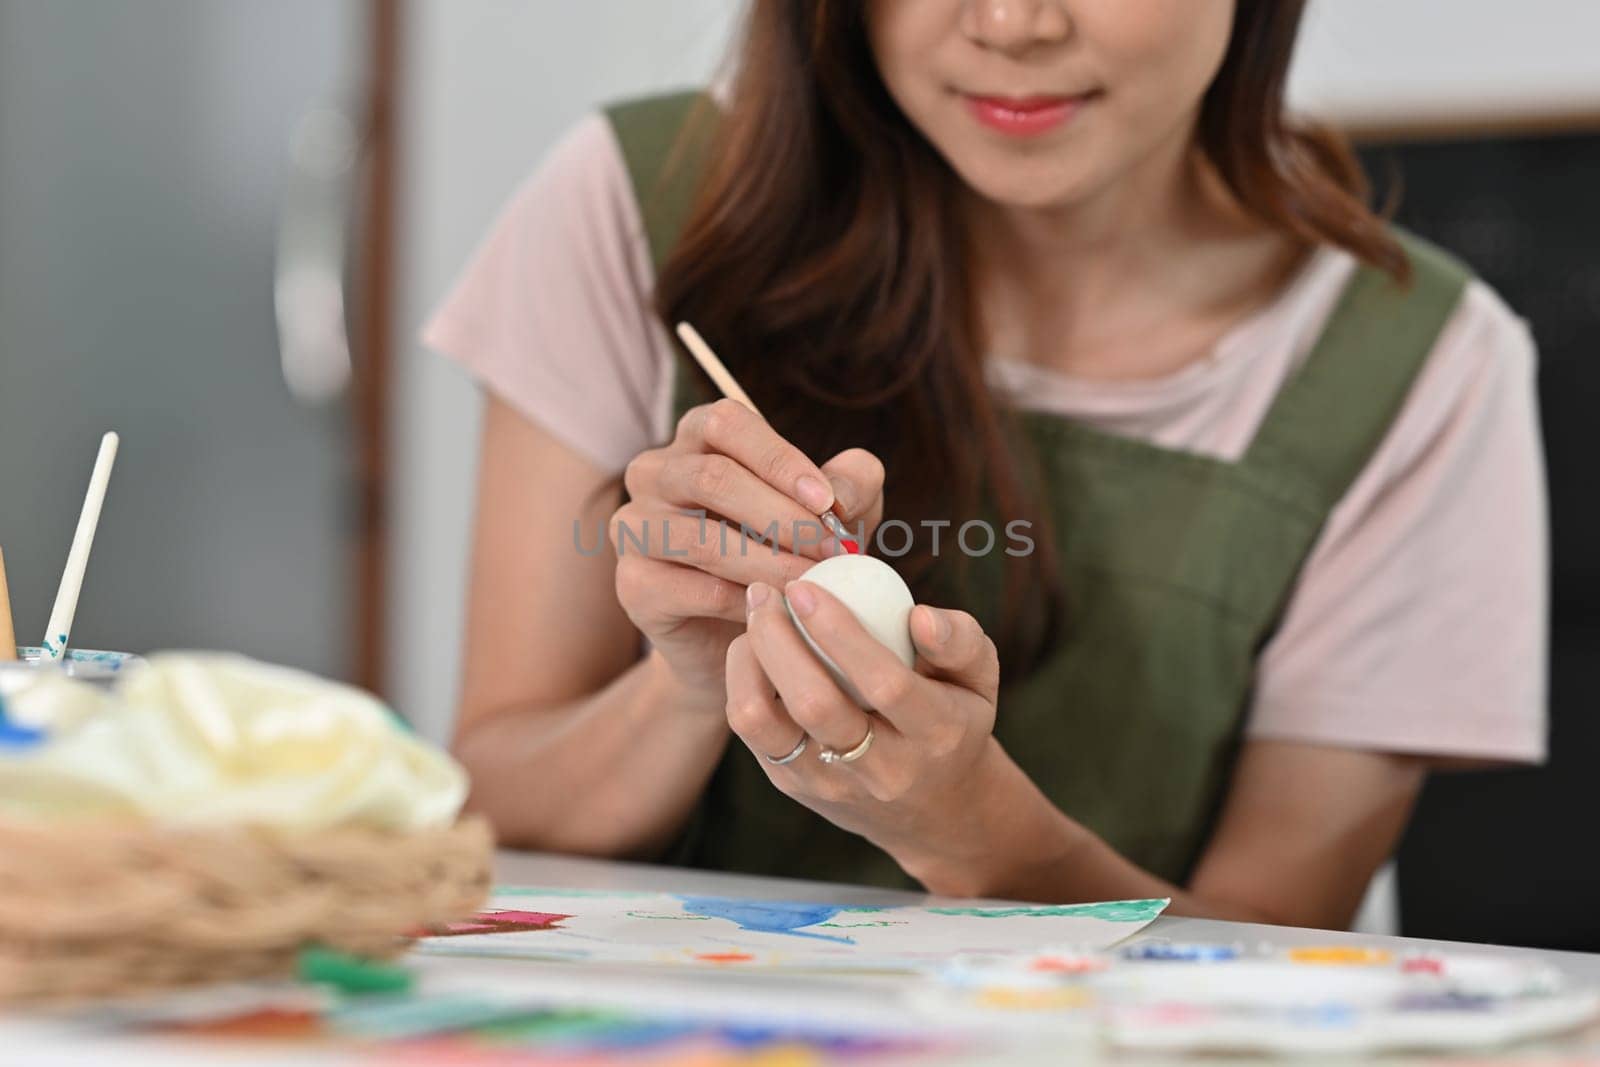 Smiling young woman in apron painting Easter egg with brush at table. Preparing for Easter concept by prathanchorruangsak